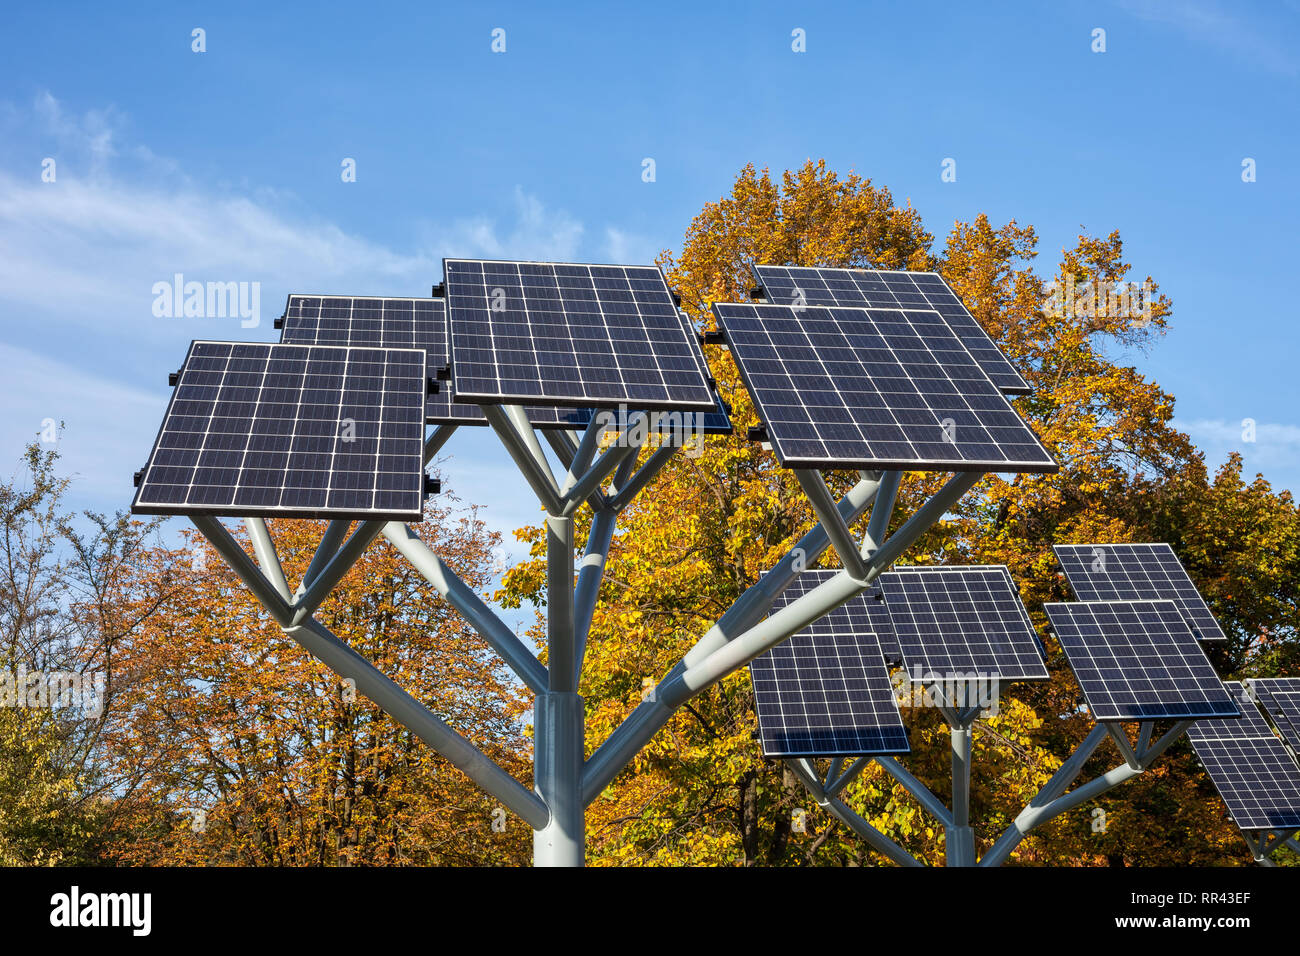 Solar panels on a stand in city park, photovoltaic modules, sustainable renewable energy source Stock Photo